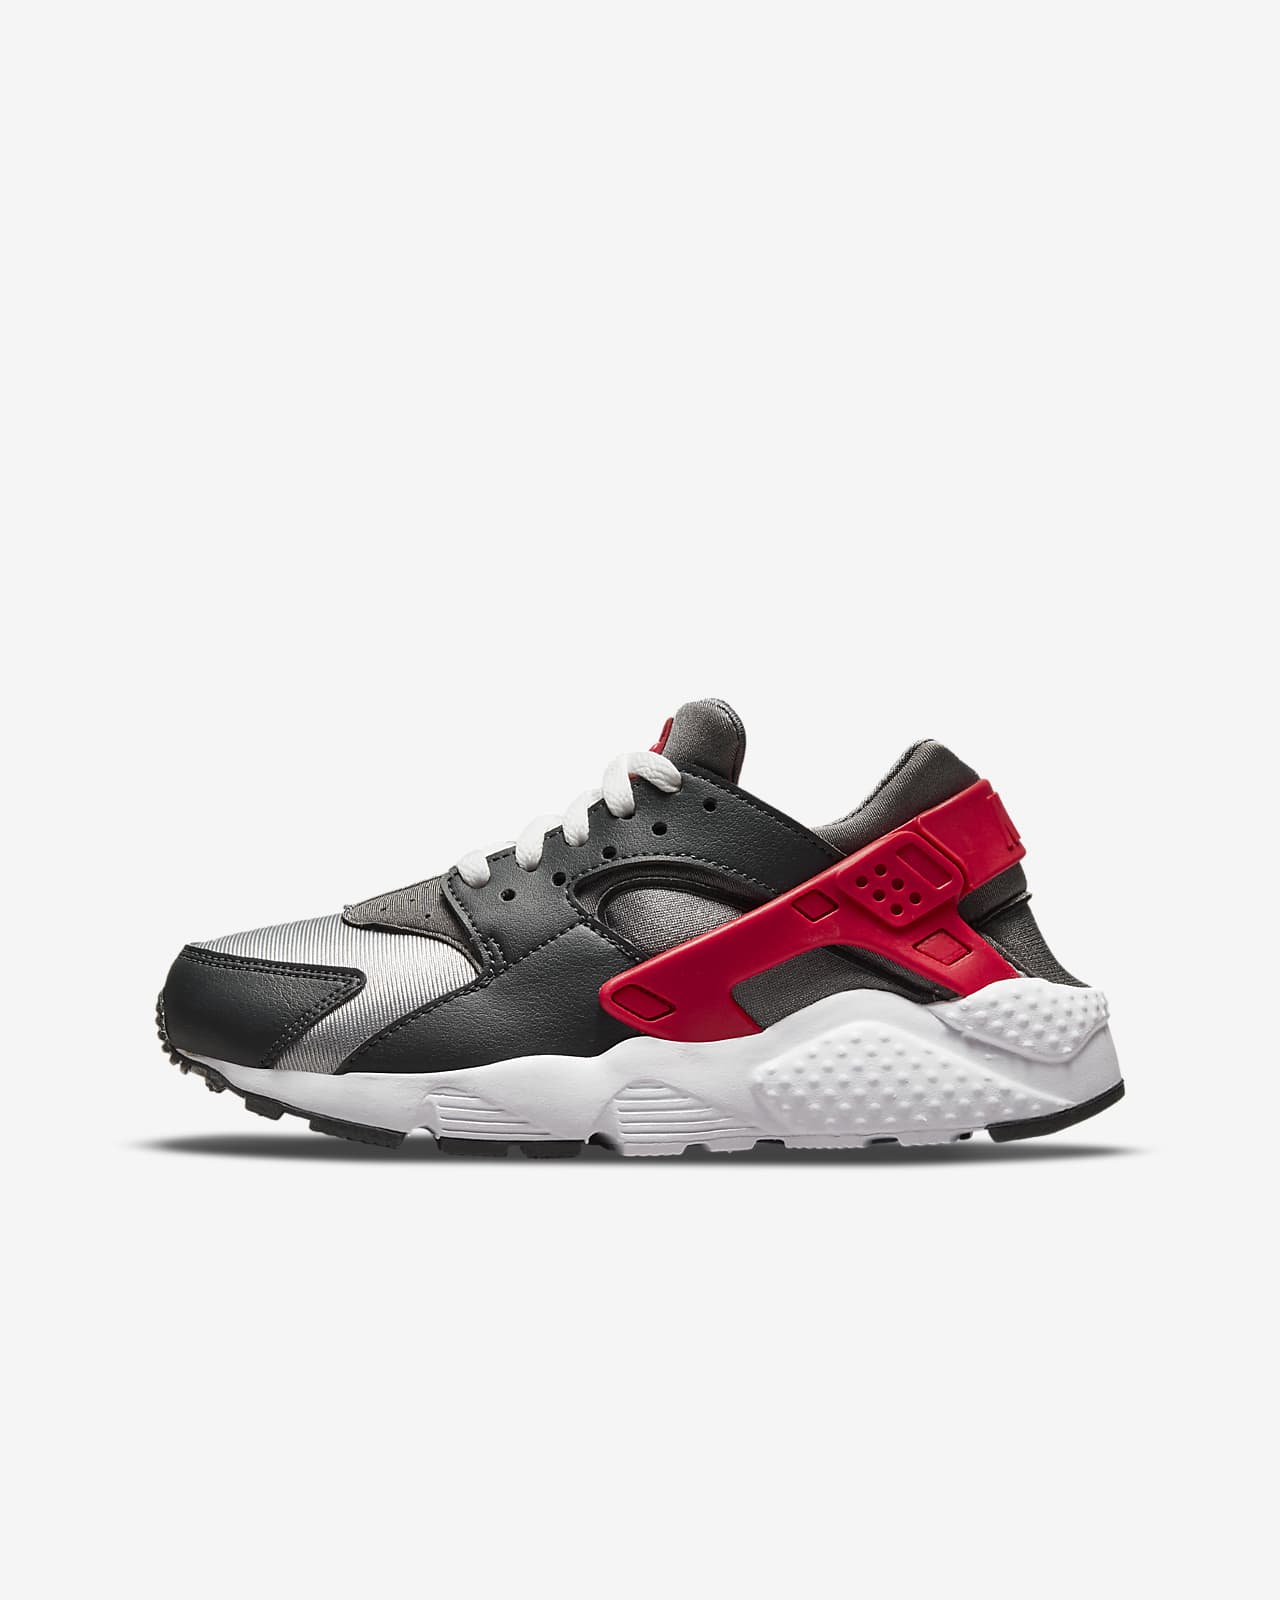 huarache sneakers for toddlers